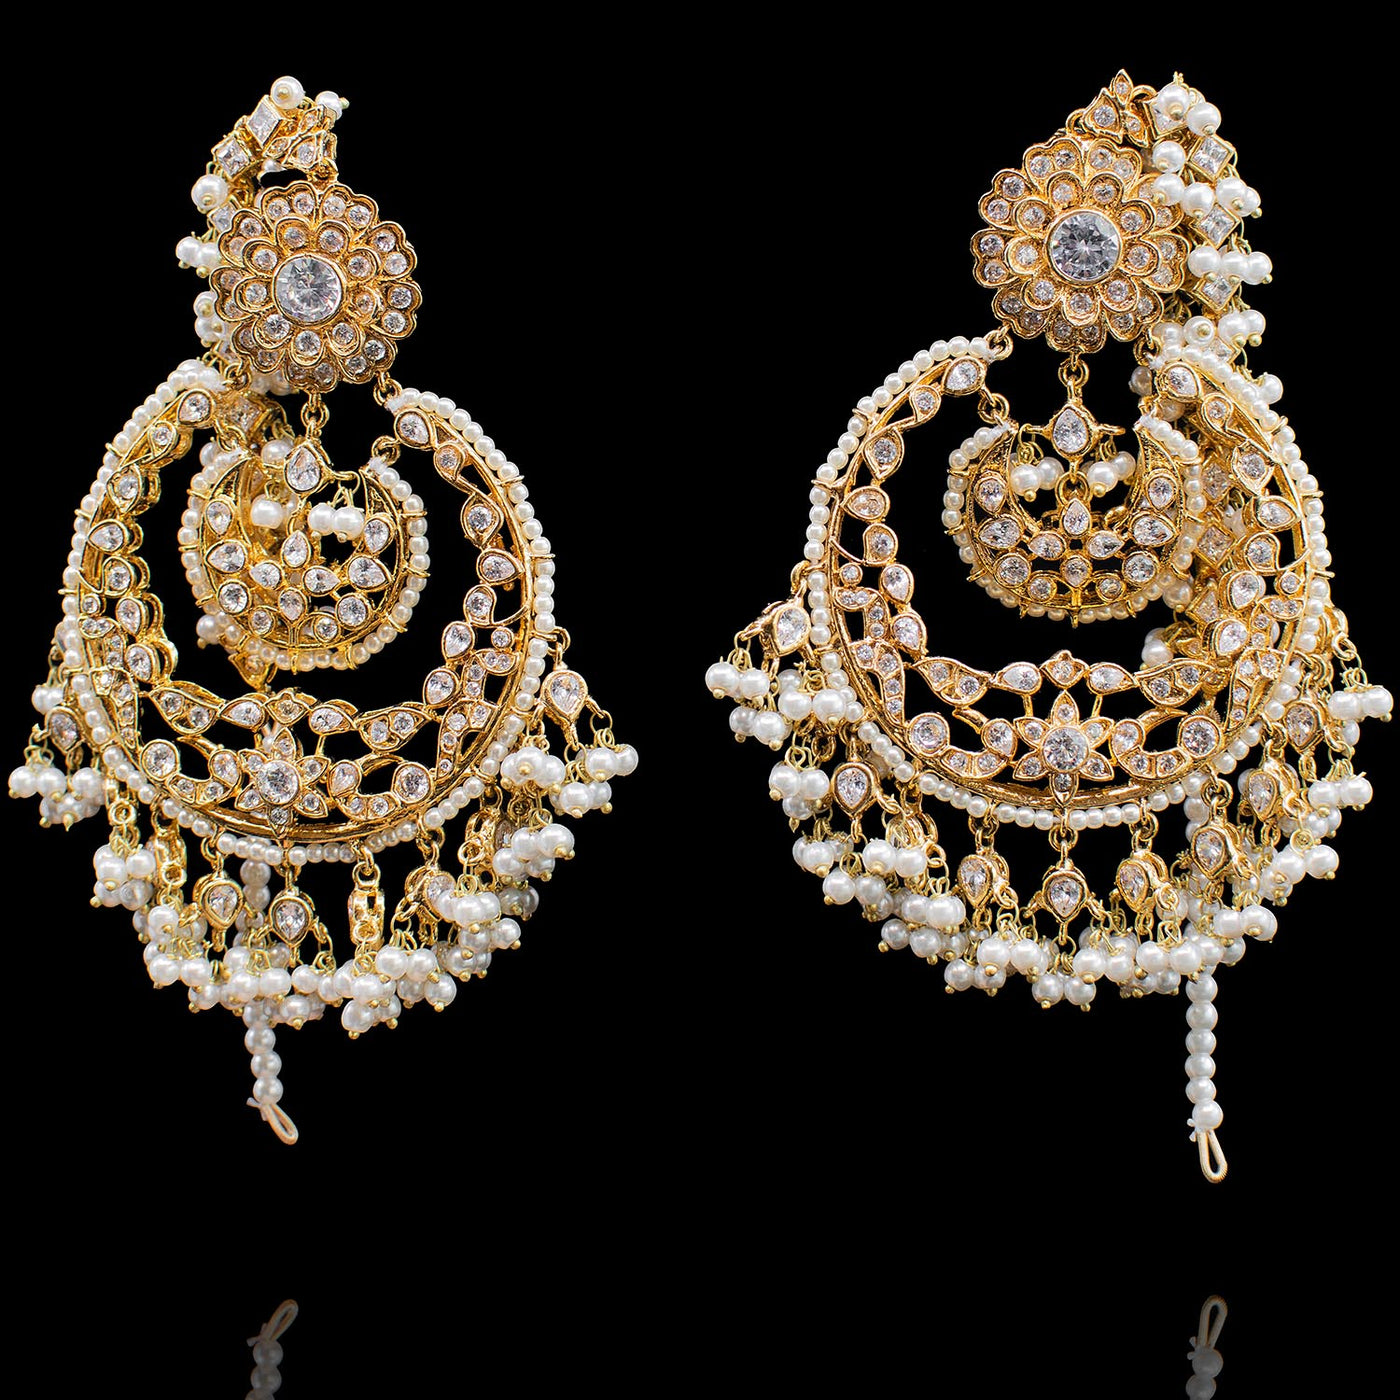 Laleen Earrings - Available in 2 Options